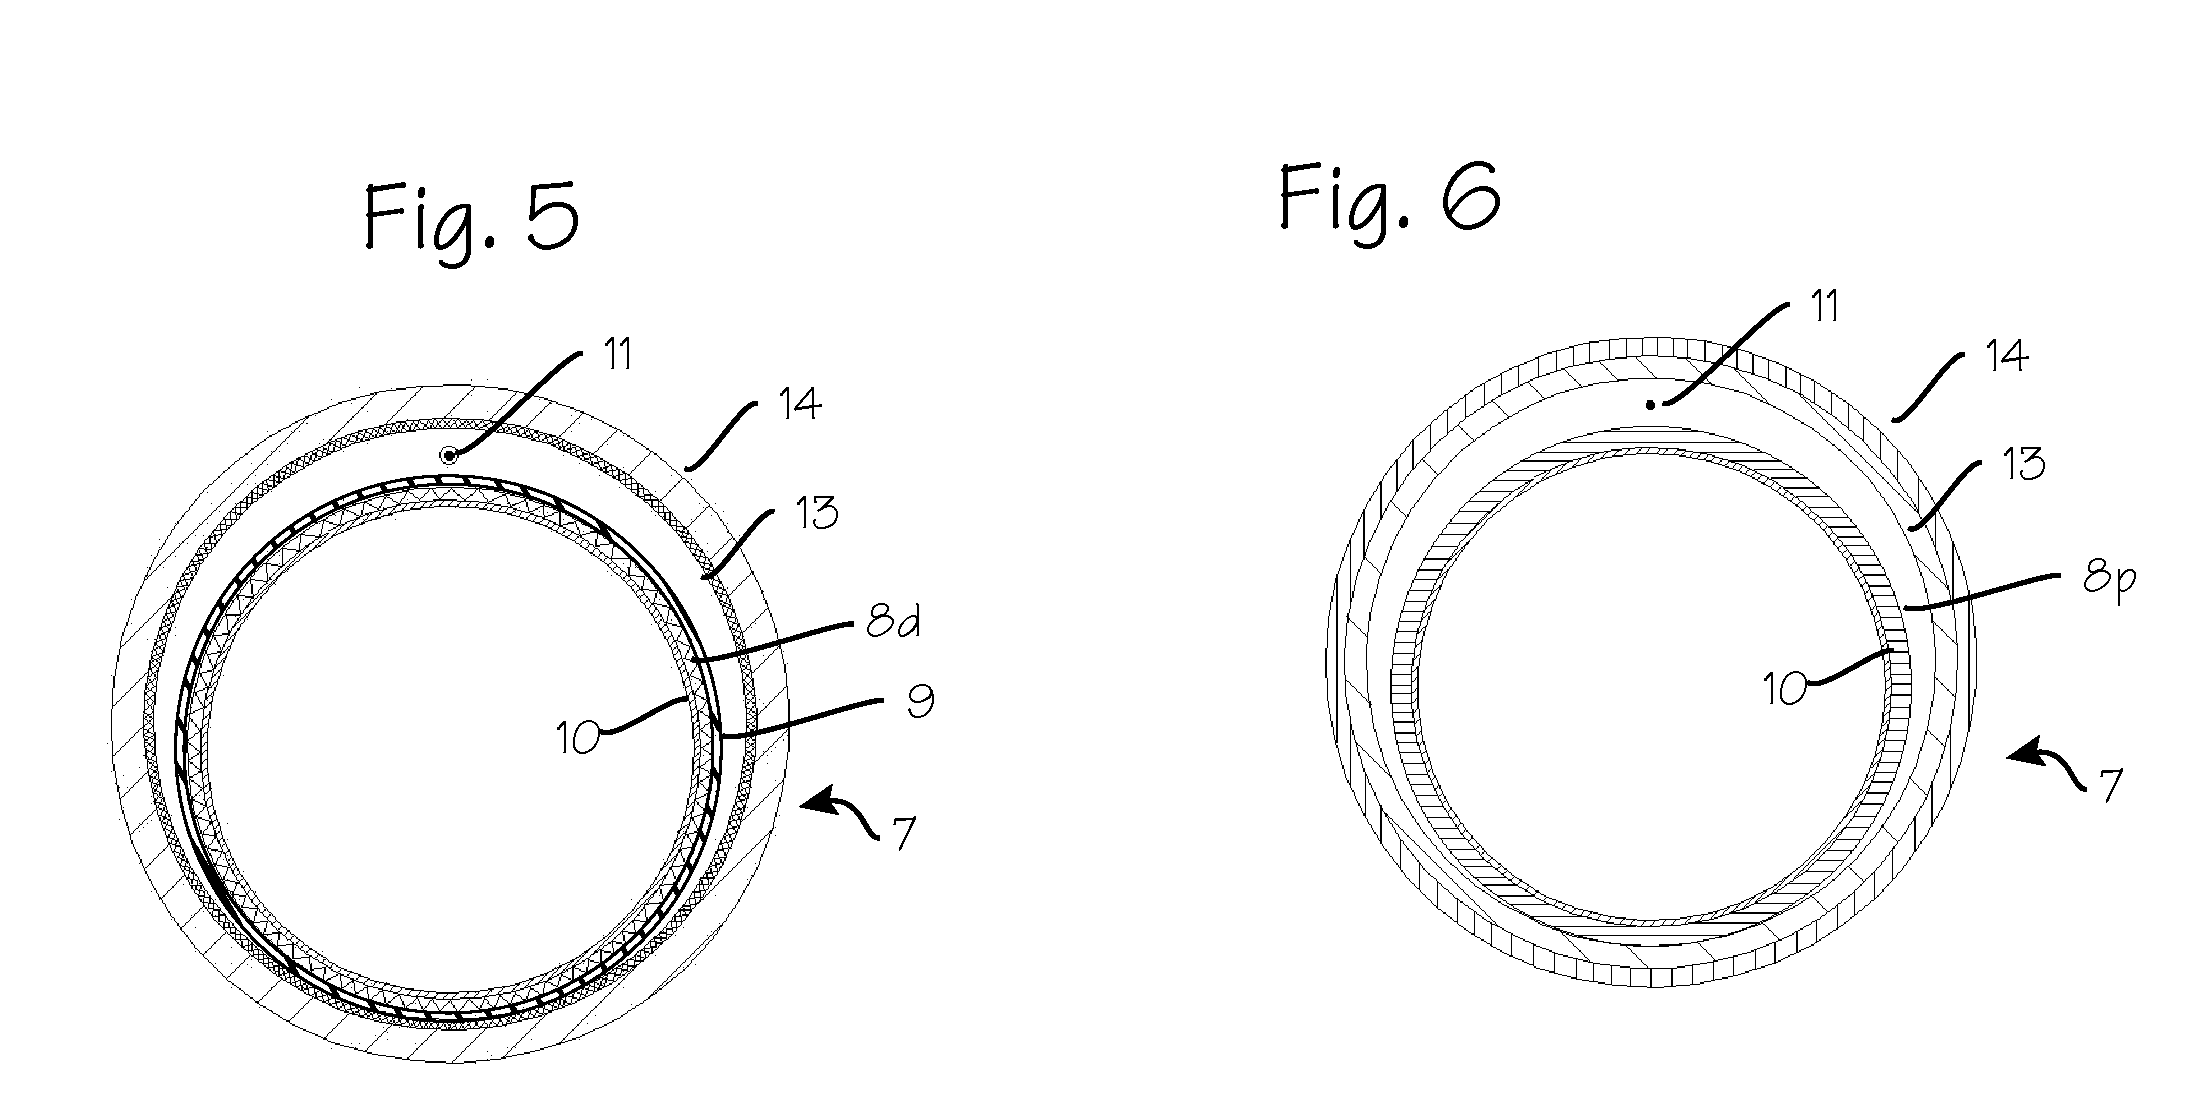 Steerable Guide Catheters and Methods For Their Use